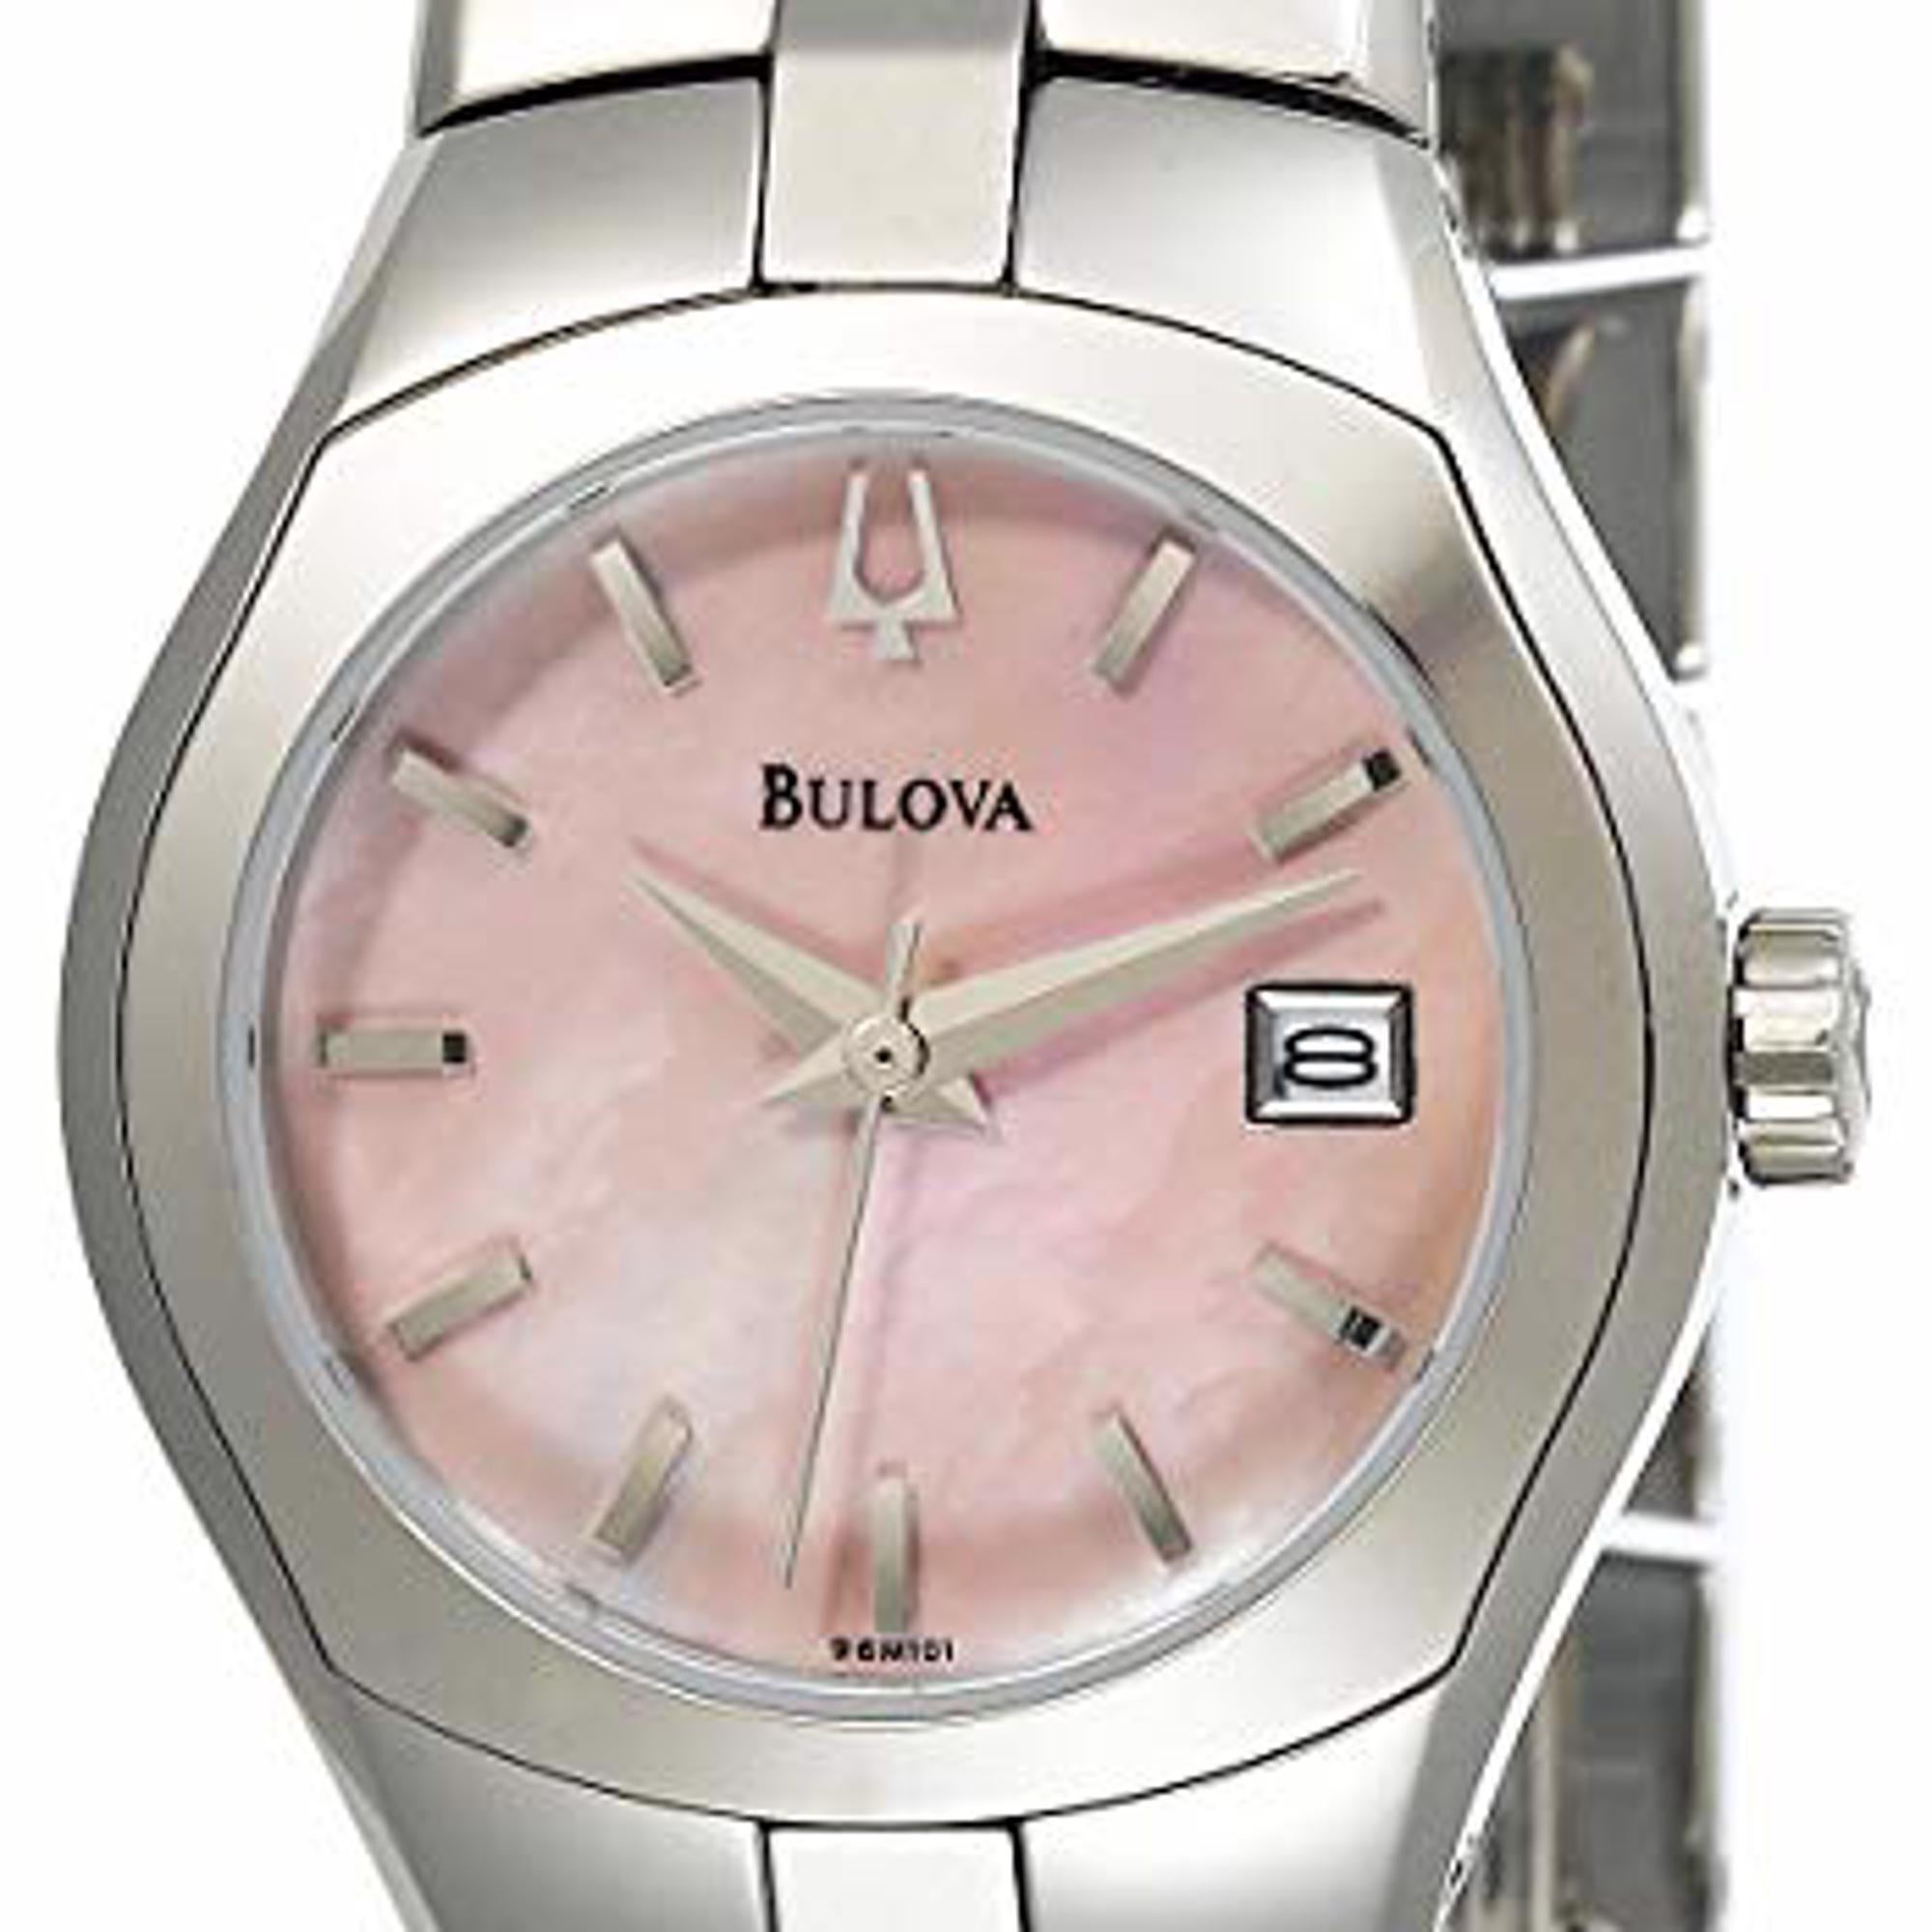 Display Model Bulova 26mm Stainless Steel Pink MOP Dial Ladies Quartz Watch 96M101. The Watch Has Minor Blemishes Due to Store Handling. This Beautiful Timepiece is Powered by a Quartz (Battery) Movement and Features: Stainless Steel Case and